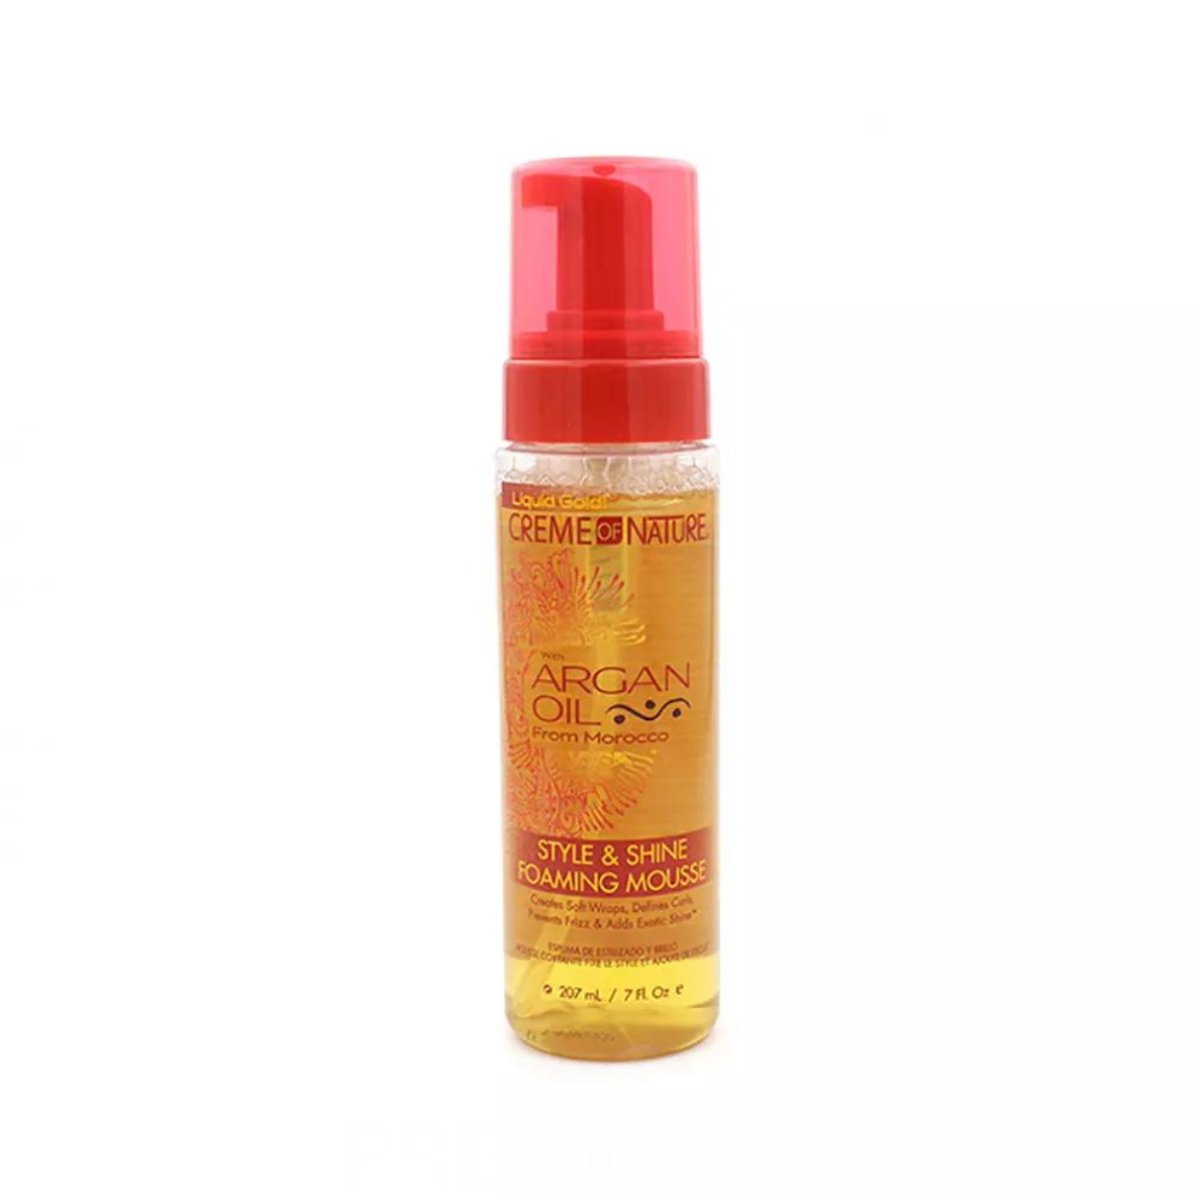 Creme Of Nature Argan Oil Style & Shine Foaming Mousse 207ml - CosFair GmbH